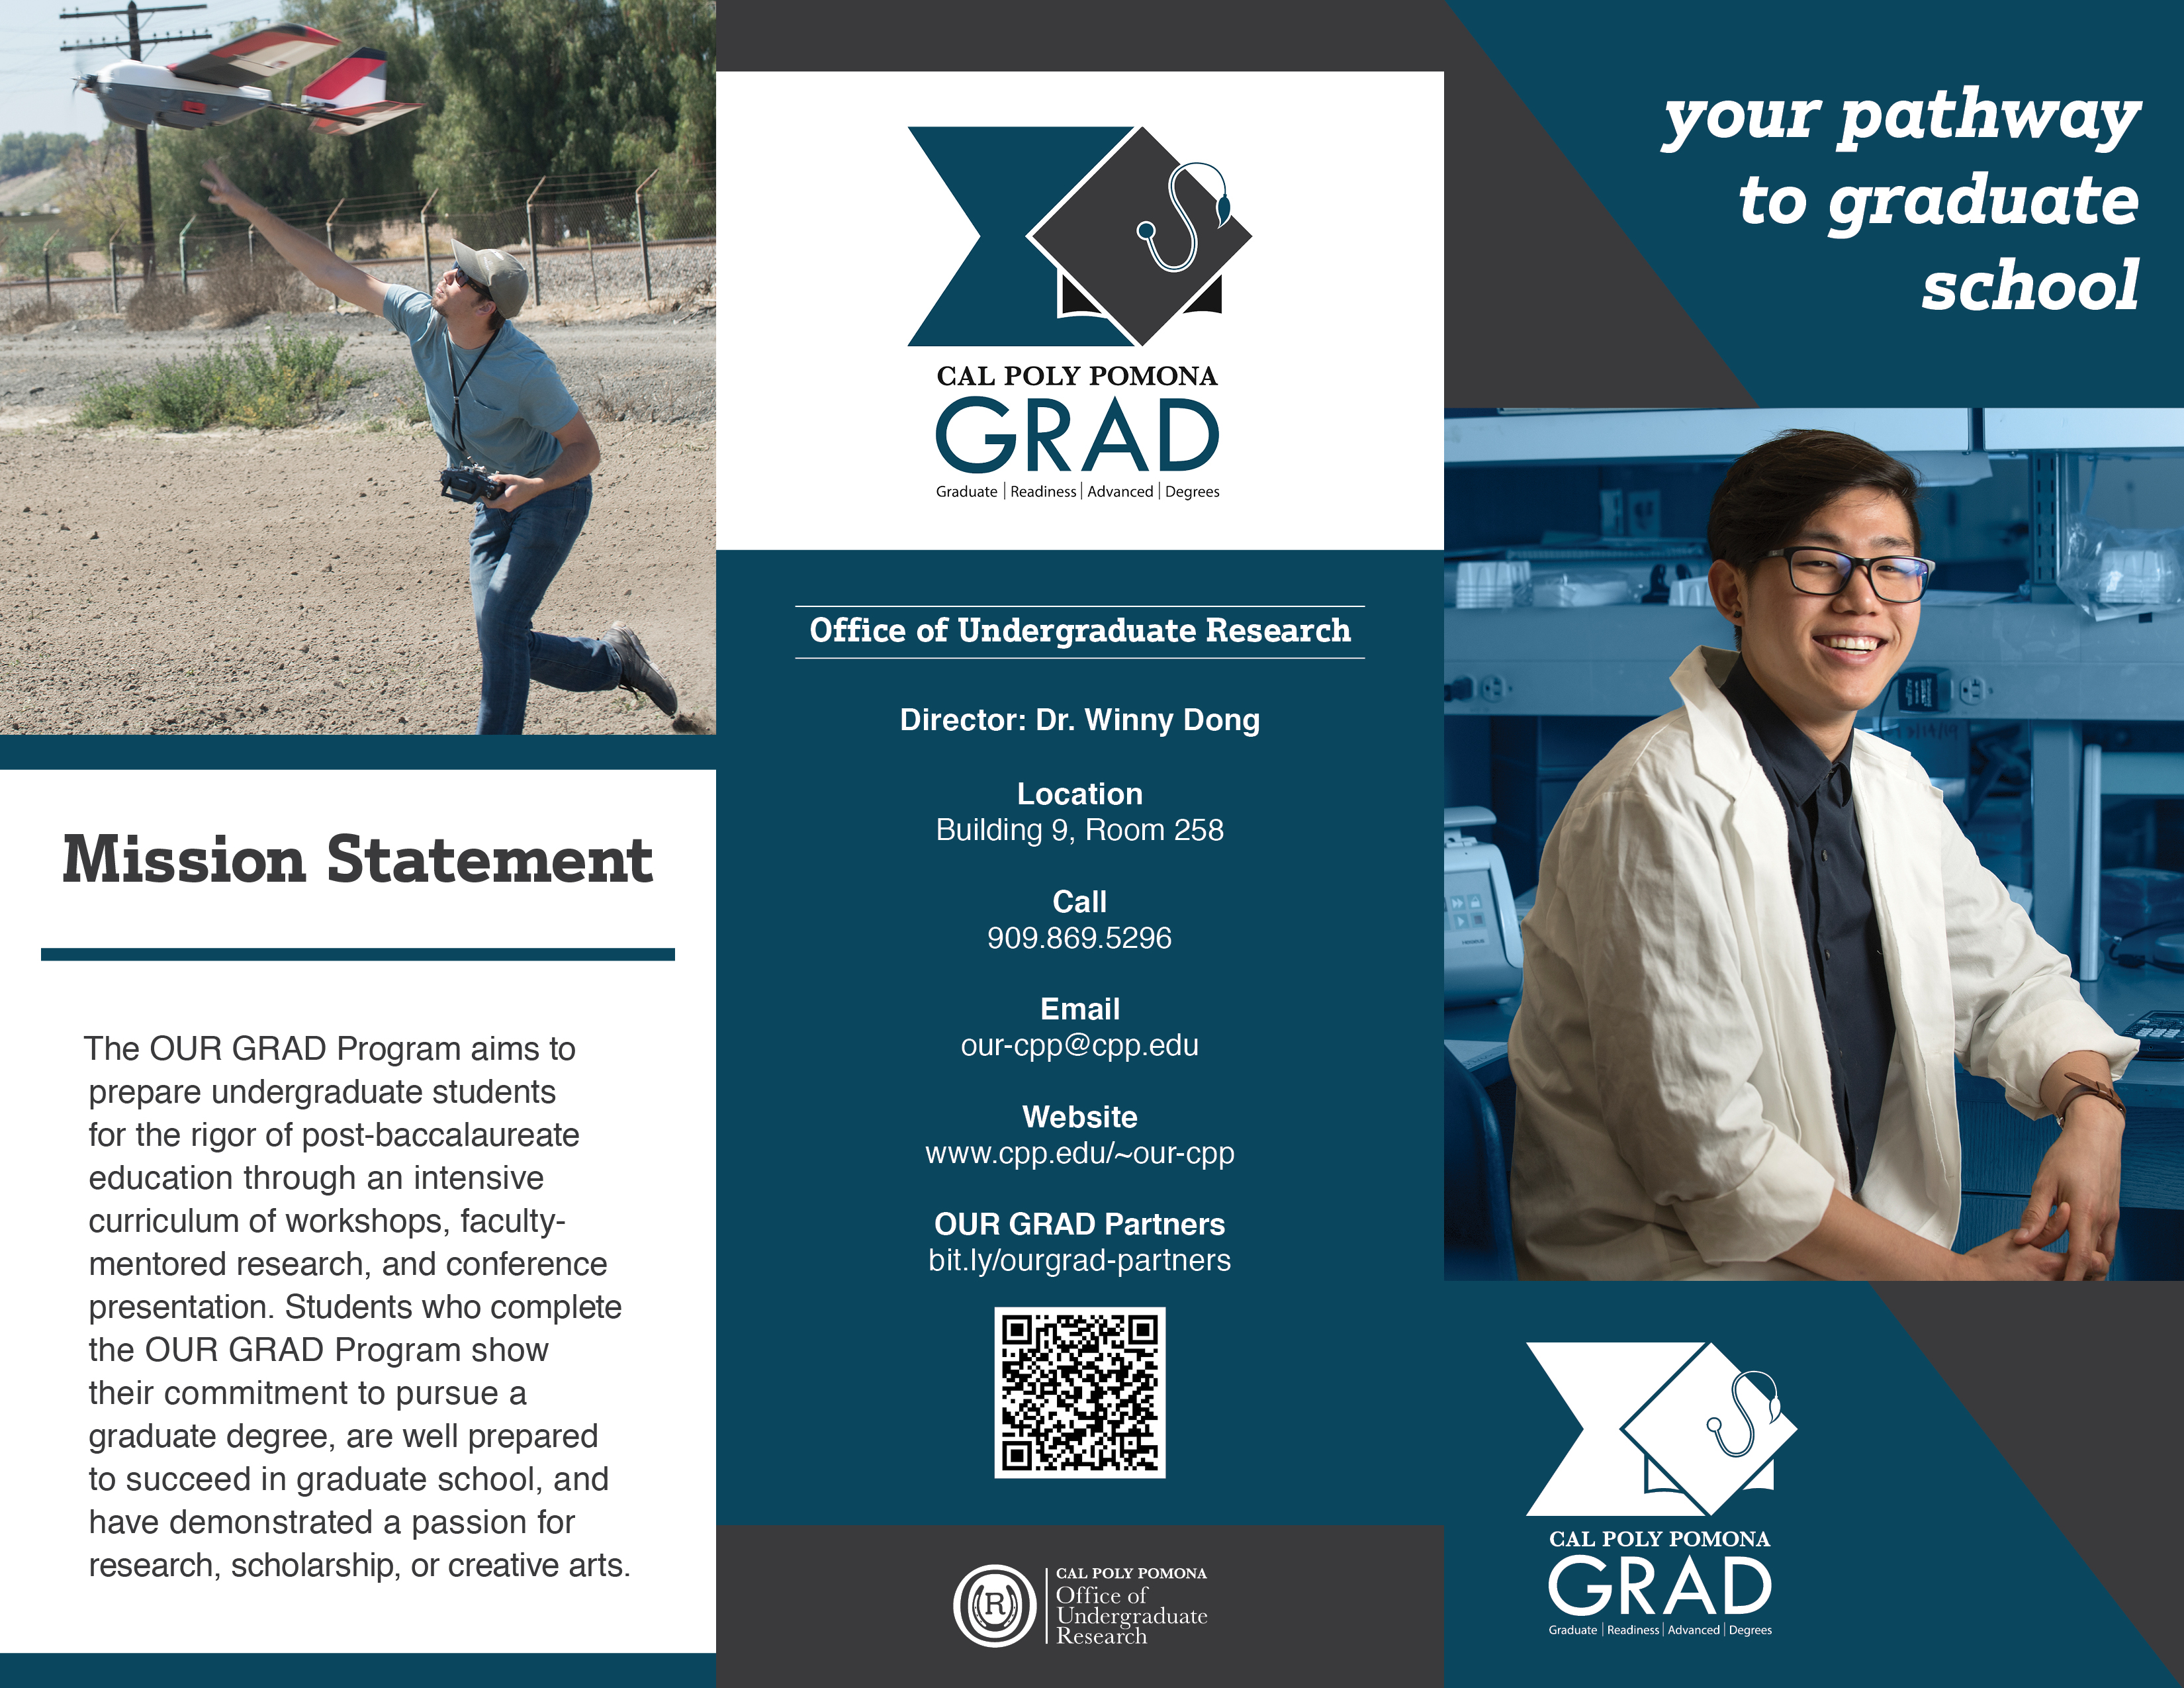 Brochure for OUR Grad. First column: Mission statement: OUR Grad Program aims to prepare undergraduate students for the rigor of post-baccalaureate education through an intensive curriculum of workshops, faculty-mentored research, and conference presentation. Students who complete the OUR Grad Program show their commitment to pursue a graduate degree, are well prepared to succeed in graduate school, and have demonstrated a passion for research, scholarship, or creative arts. Second column: OUR Contact information: Building 1, Director: Dr. Winny Dong, Phone: 909-869-5296; email: our-cpp@cpp.edu. Third-column: Image of student in lab